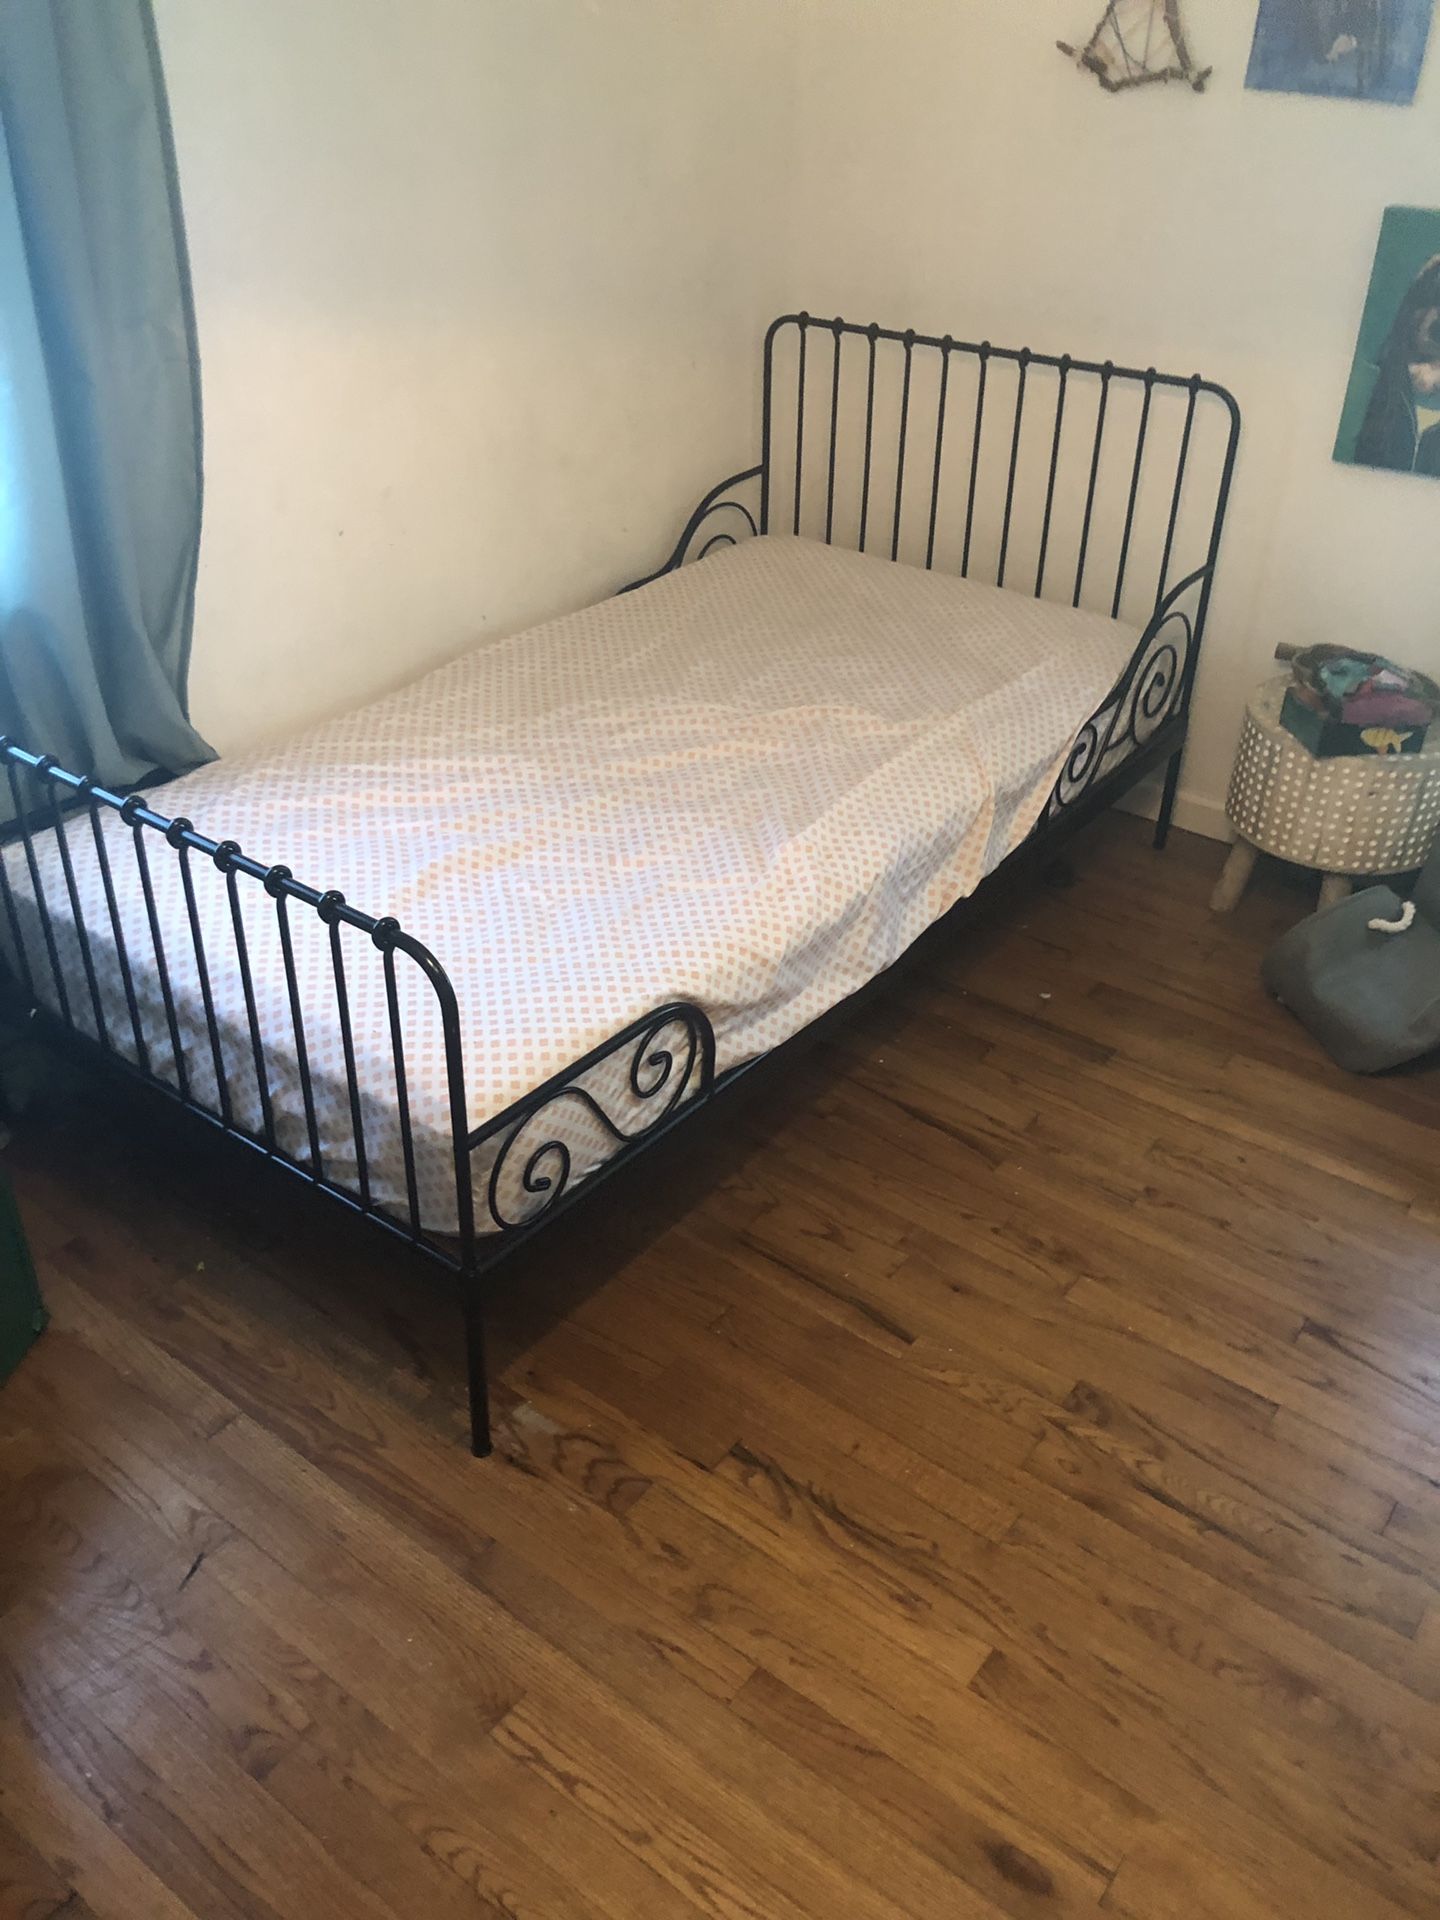 IKEA extendable bed